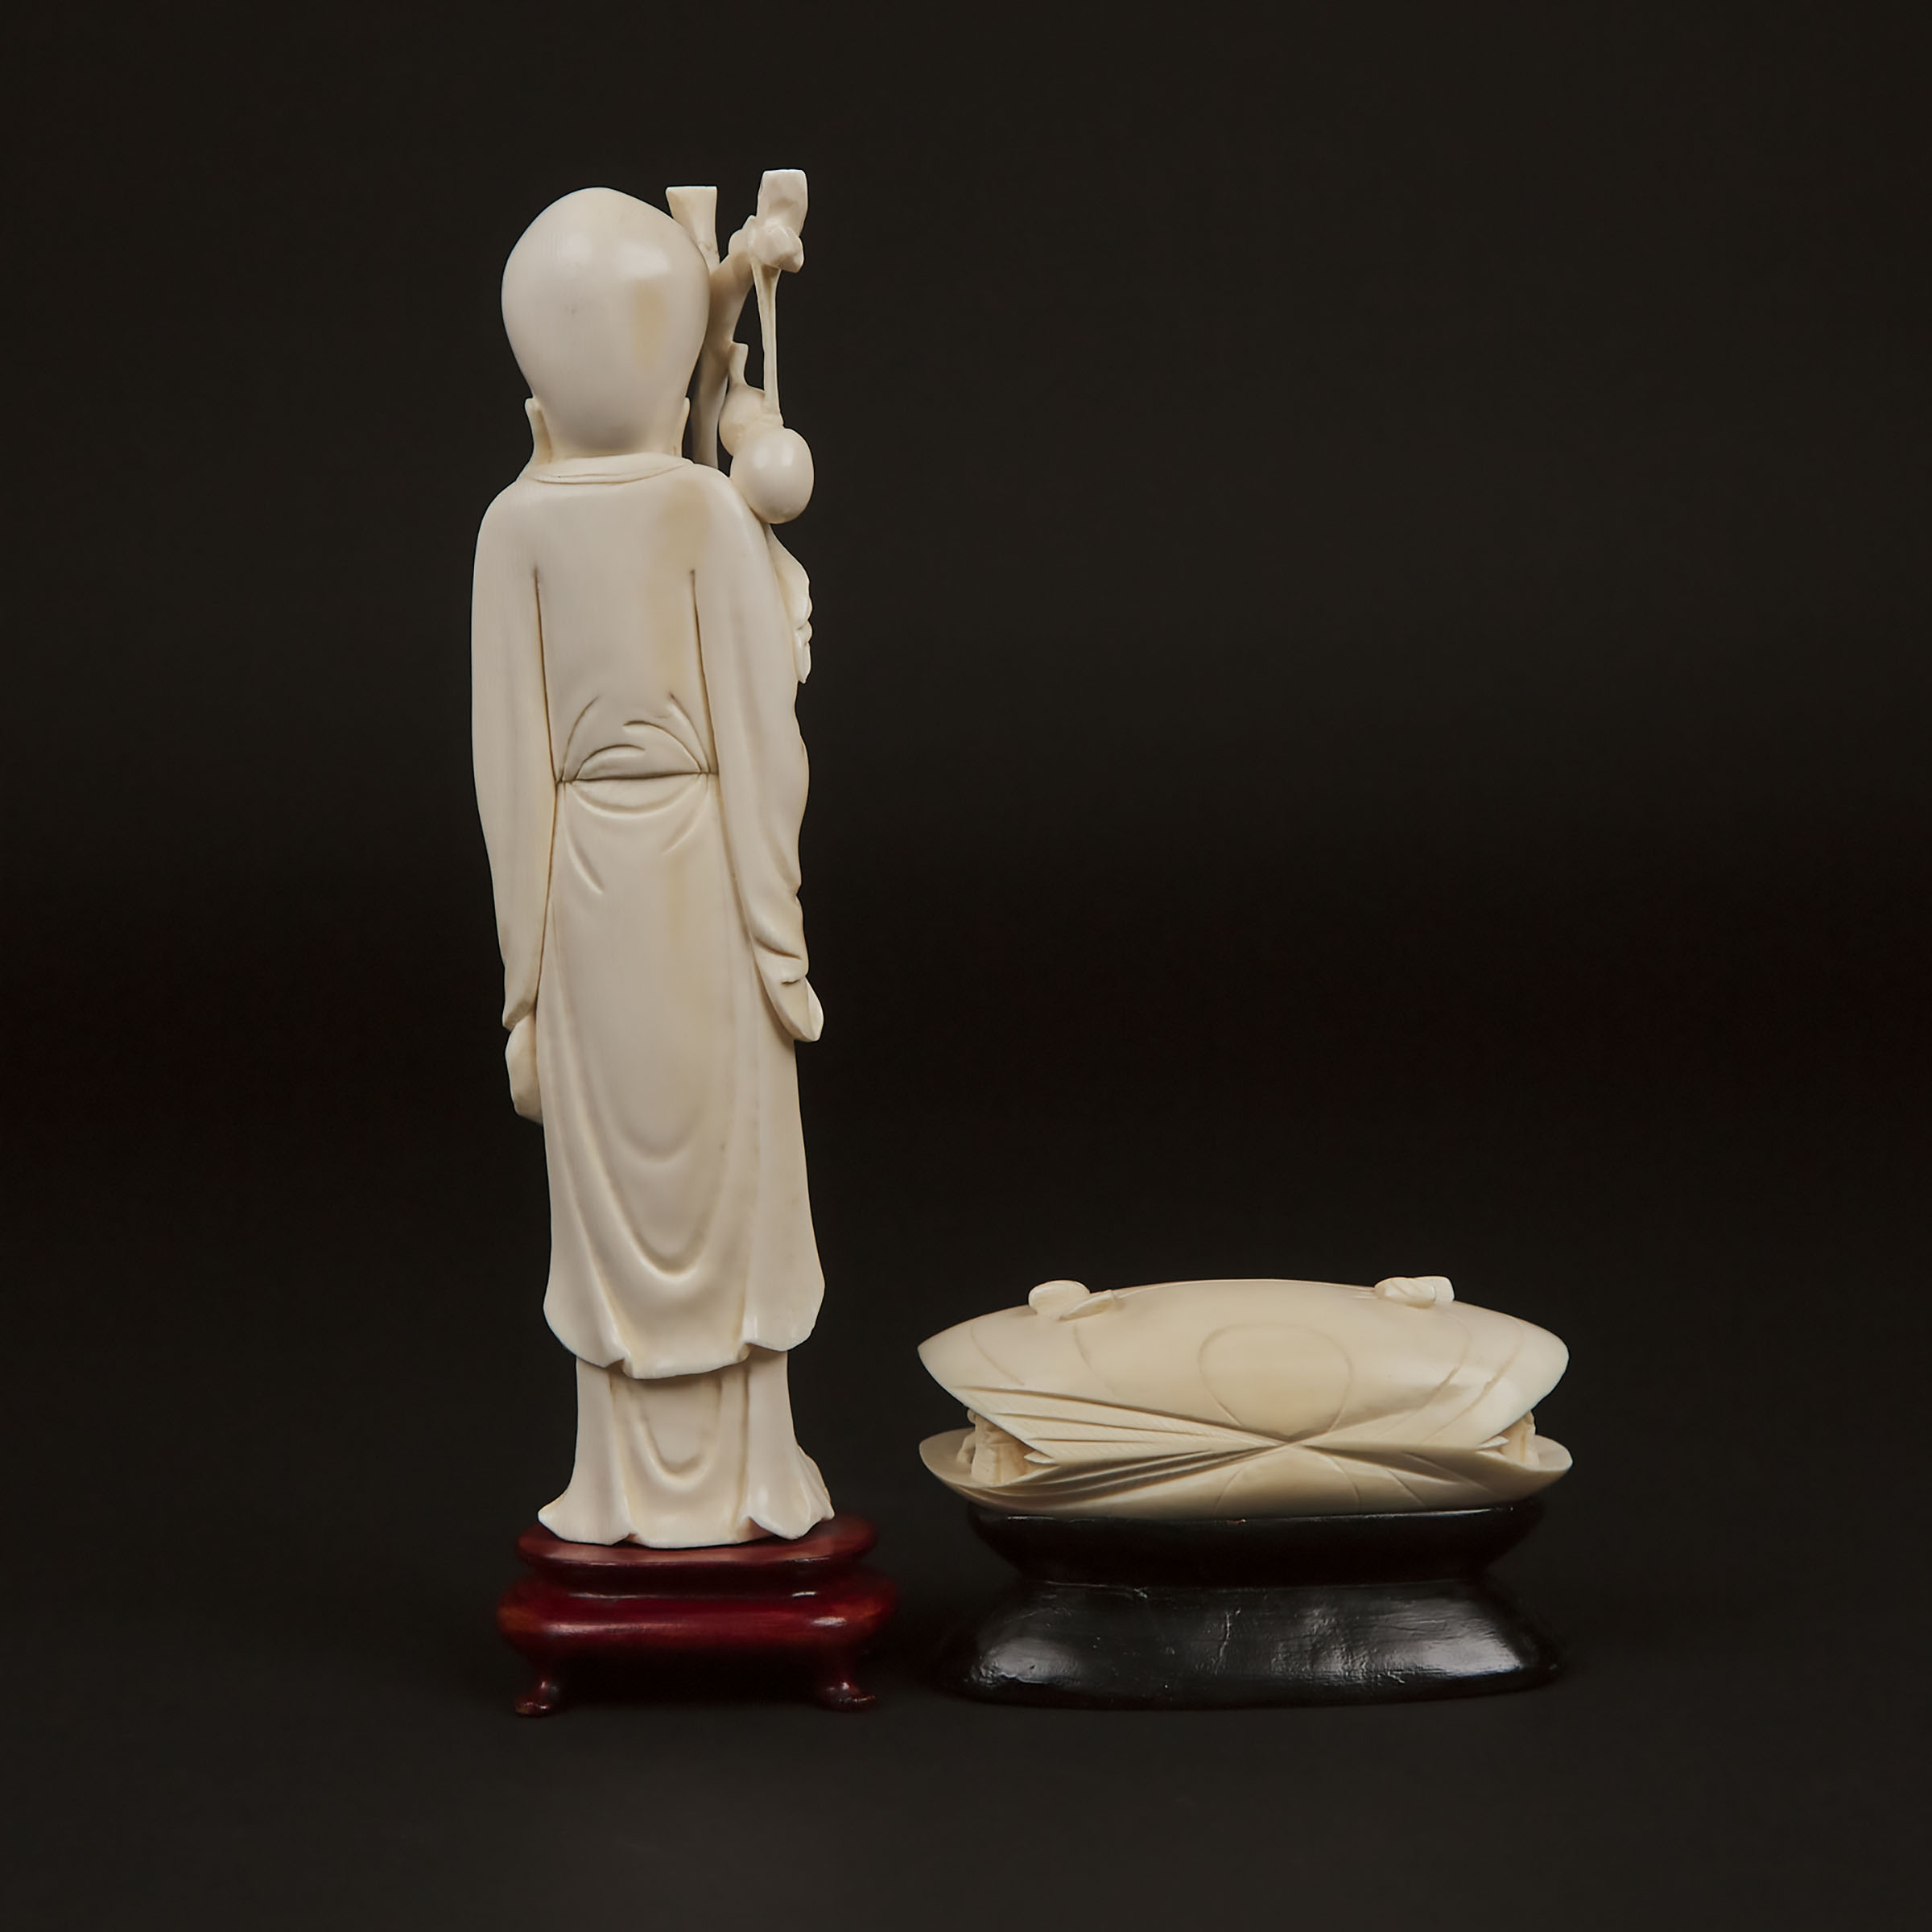 Two Ivory Carvings of Shoulao and a Landscape Within a Clam Shell, Mid 20th Century